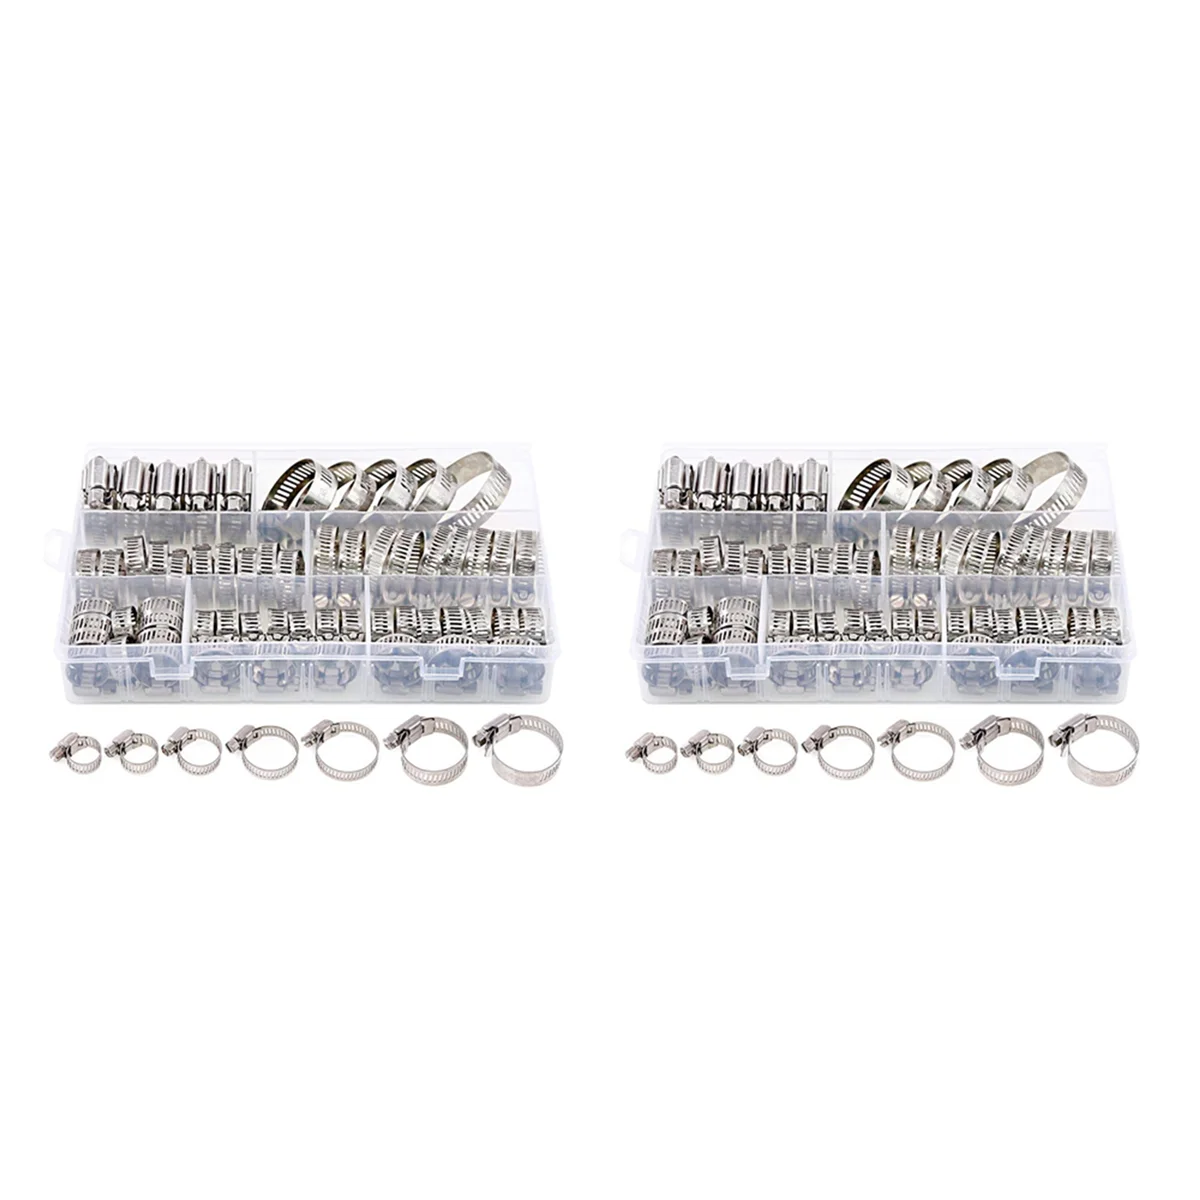 

120-Piece Hose Clamp Set, 8-38 mm Pipe Clamps Made of 201 Stainless Steel, 7 Sizes Hose Clamps, Hose Ties, for Pipes